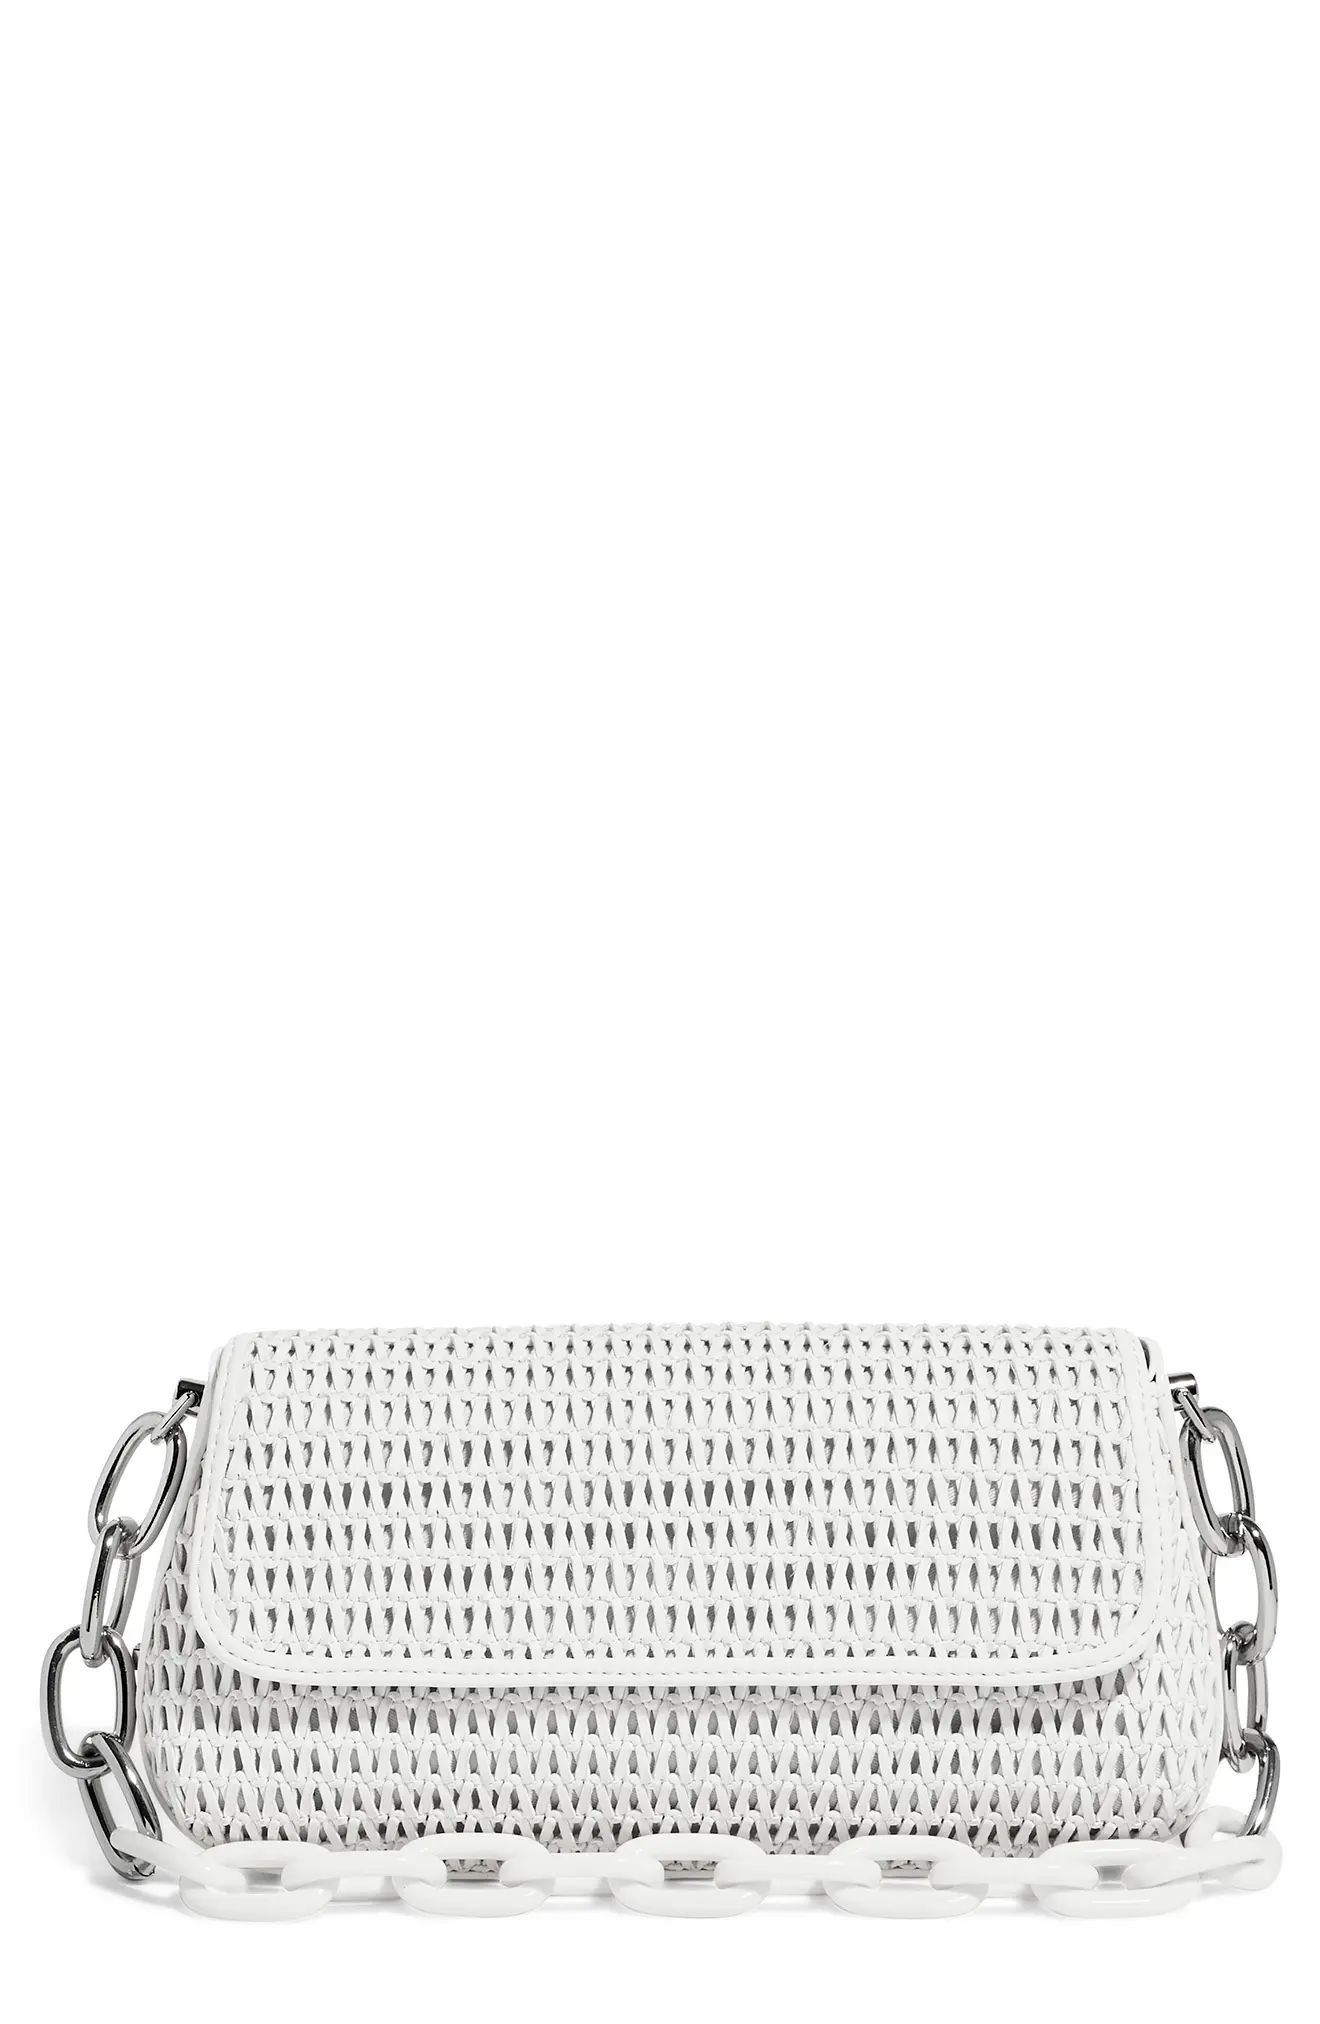 HOUSE OF WANT We Fashion Vegan Leather Chain Strap Shoulder Bag in White Woven at Nordstrom | Nordstrom